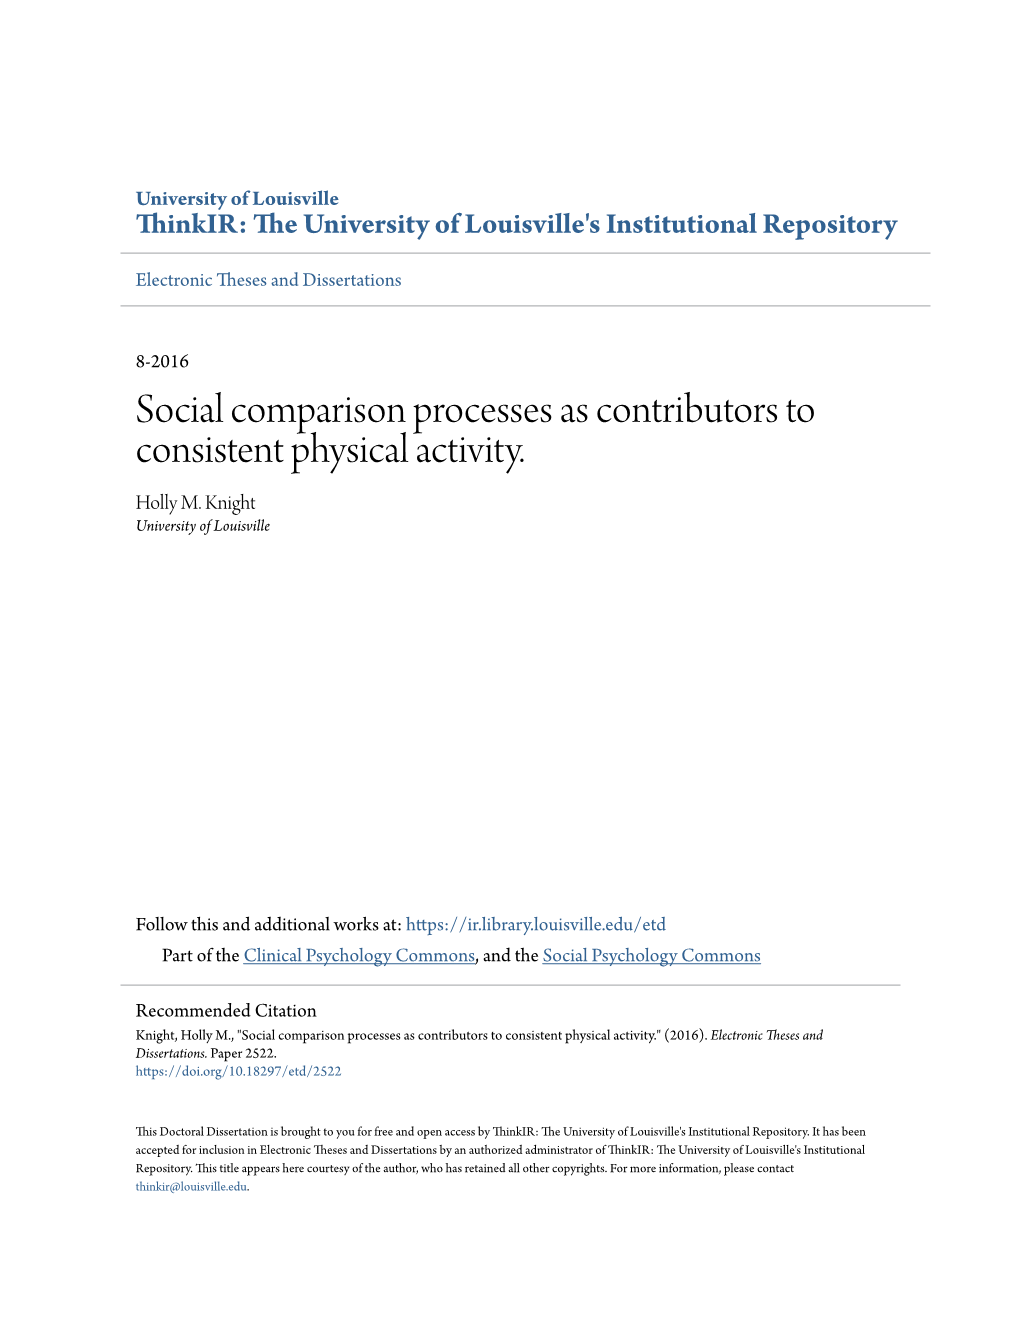 Social Comparison Processes As Contributors to Consistent Physical Activity. Holly M